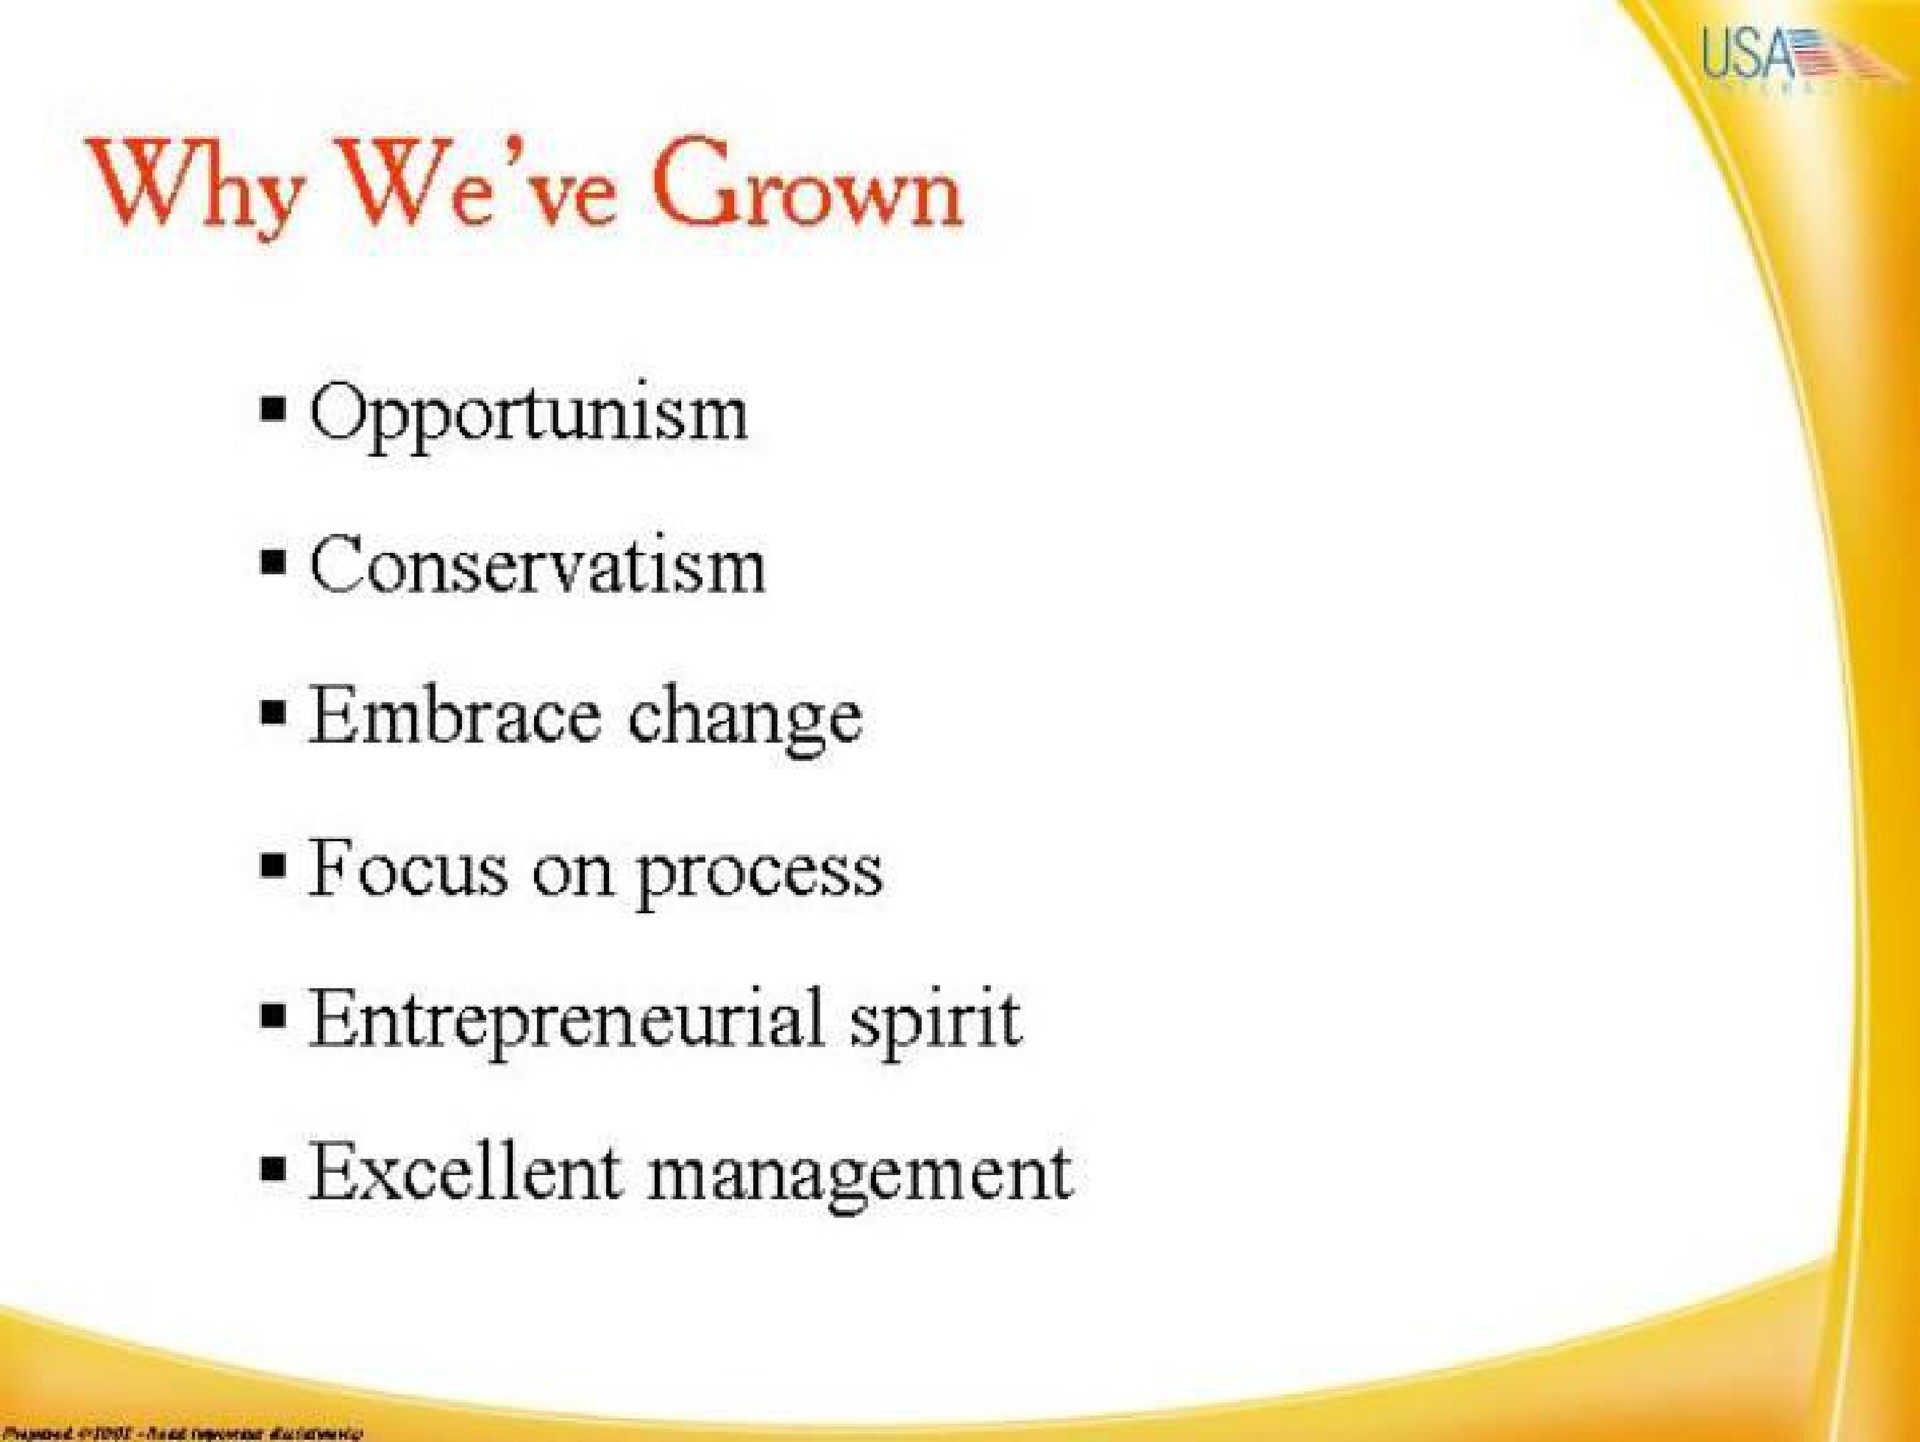 why we grown opportunism conservatism embrace change entrepreneurial spirit focus on process excellent management | IAC